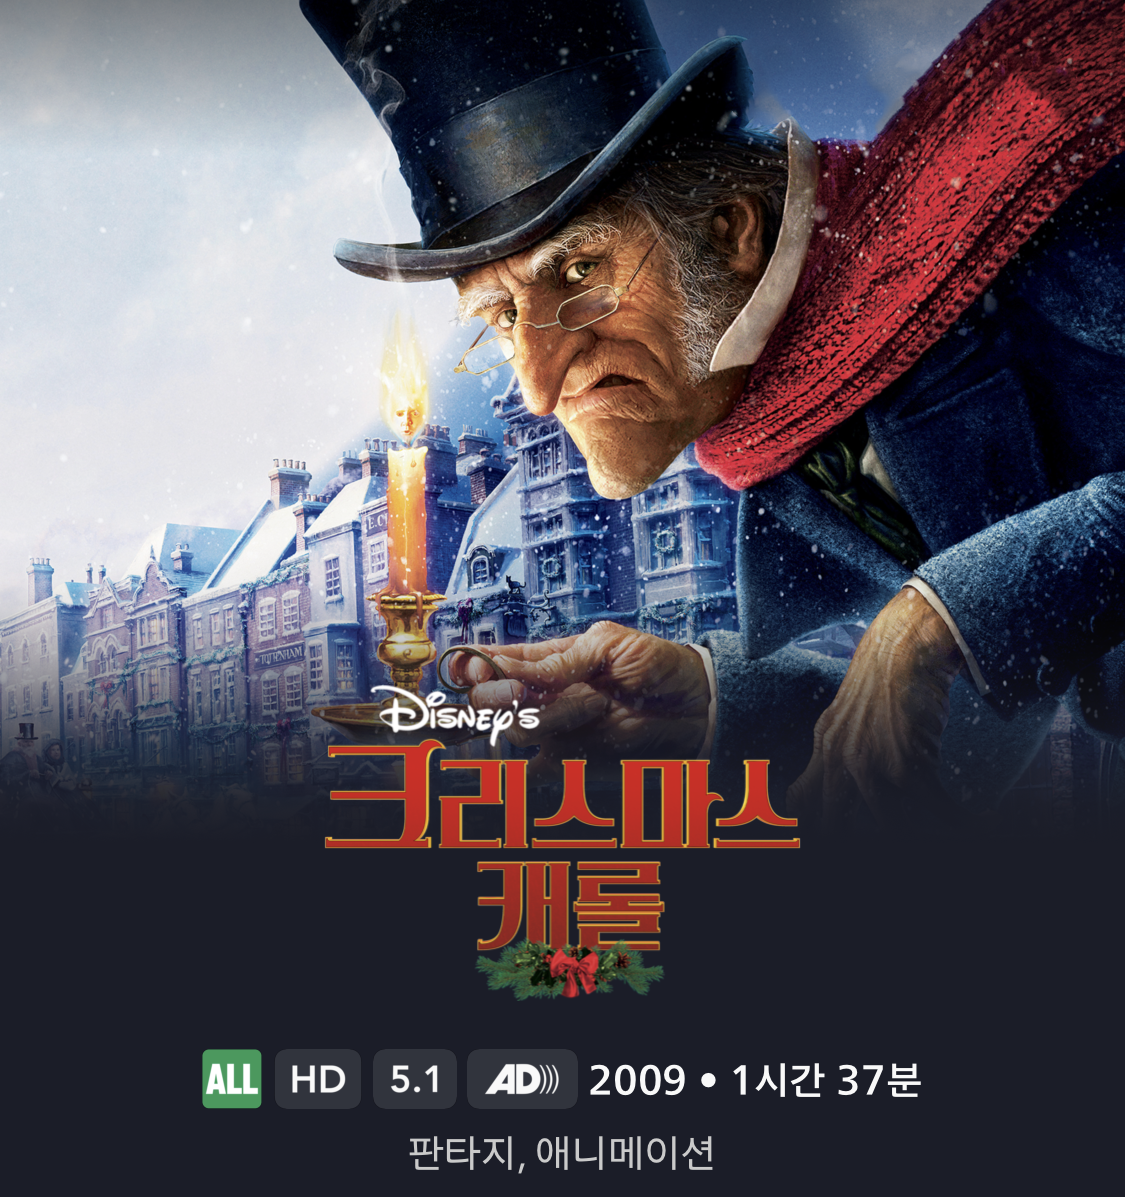 <h6 style="text-align: center;"><span style="color: rgb(255, 255, 255);"><strong>크리스마스 캐럴(A Christmas Caro 2009) </span></strong></h6>